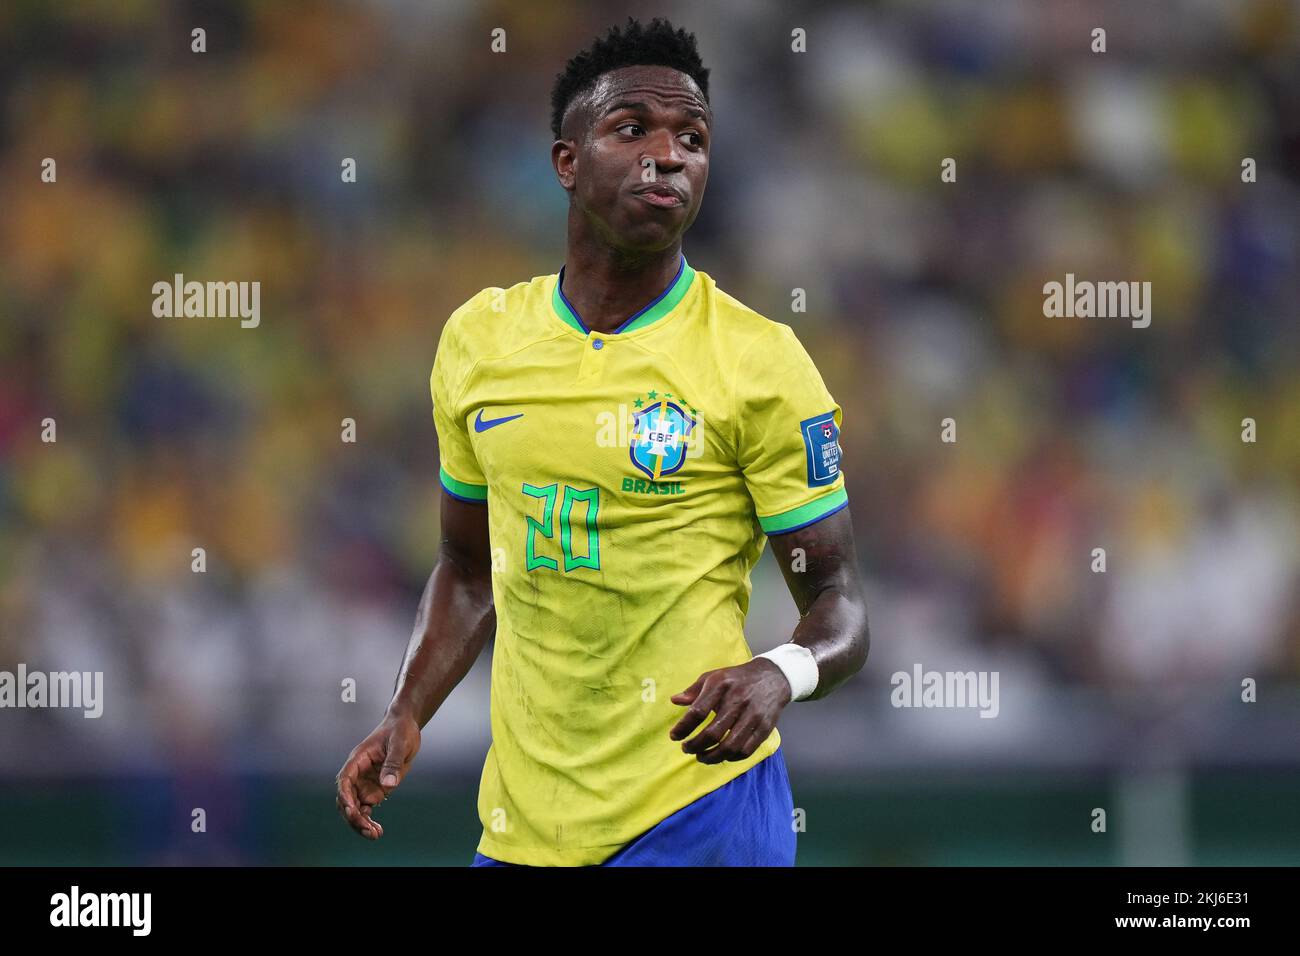 Vinicius Junior of Brazil during the FIFA World Cup Qatar 2022 match, Group G, between Brazil and Serbia played at Lusail Stadium on Nov 24, 2022 in Lusail, Qatar. (Photo by Bagu Blanco / PRESSIN) Credit: PRESSINPHOTO SPORTS AGENCY/Alamy Live News Stock Photo